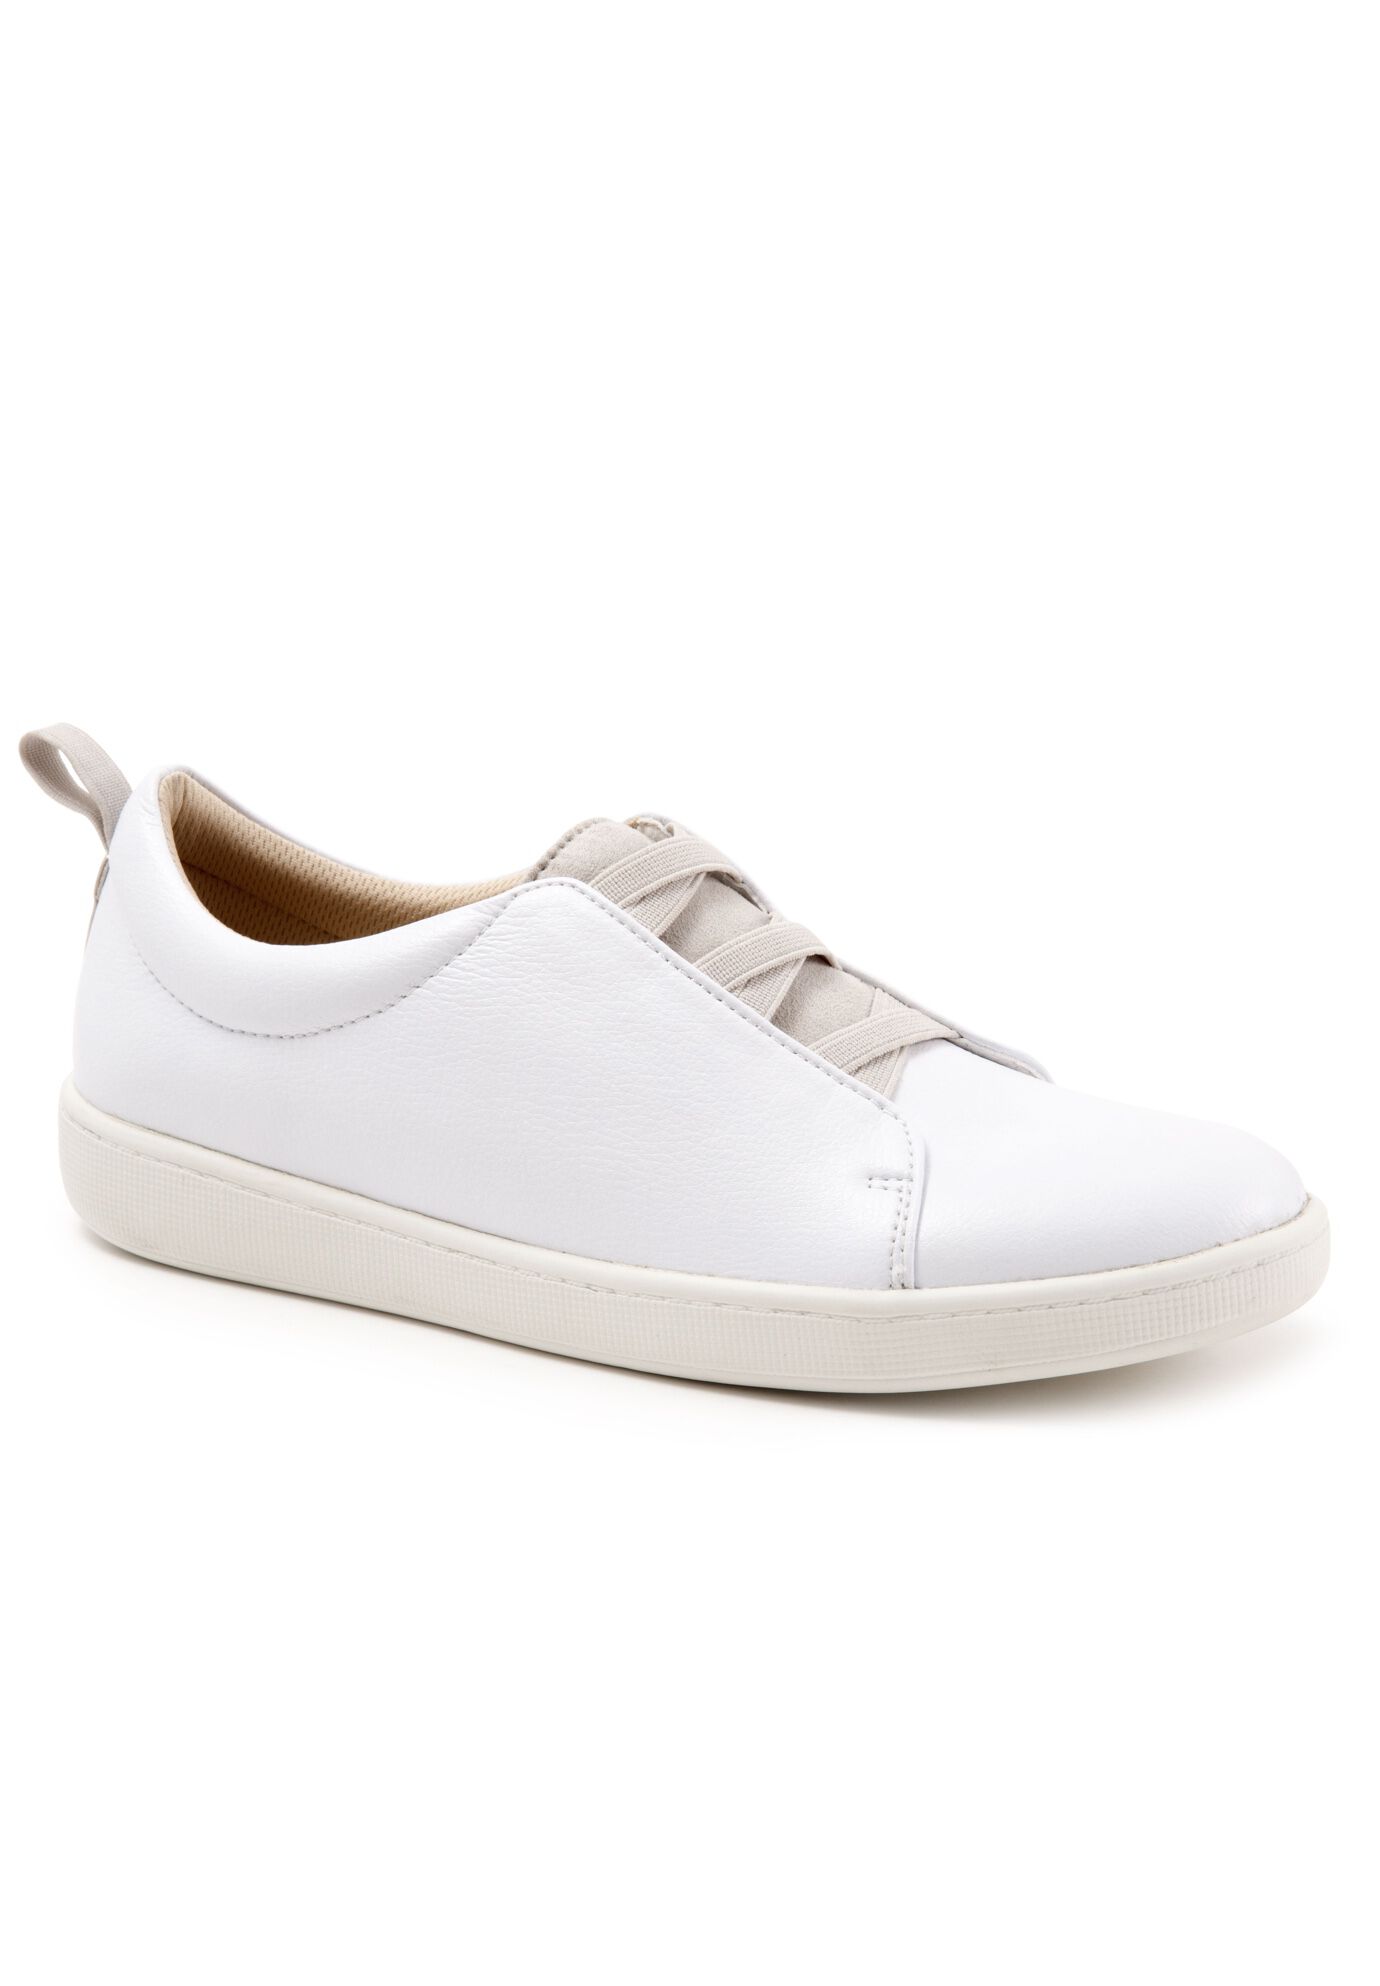 Extra Wide Width Women's Arville Slip On by Trotters in White (Size 12 WW)